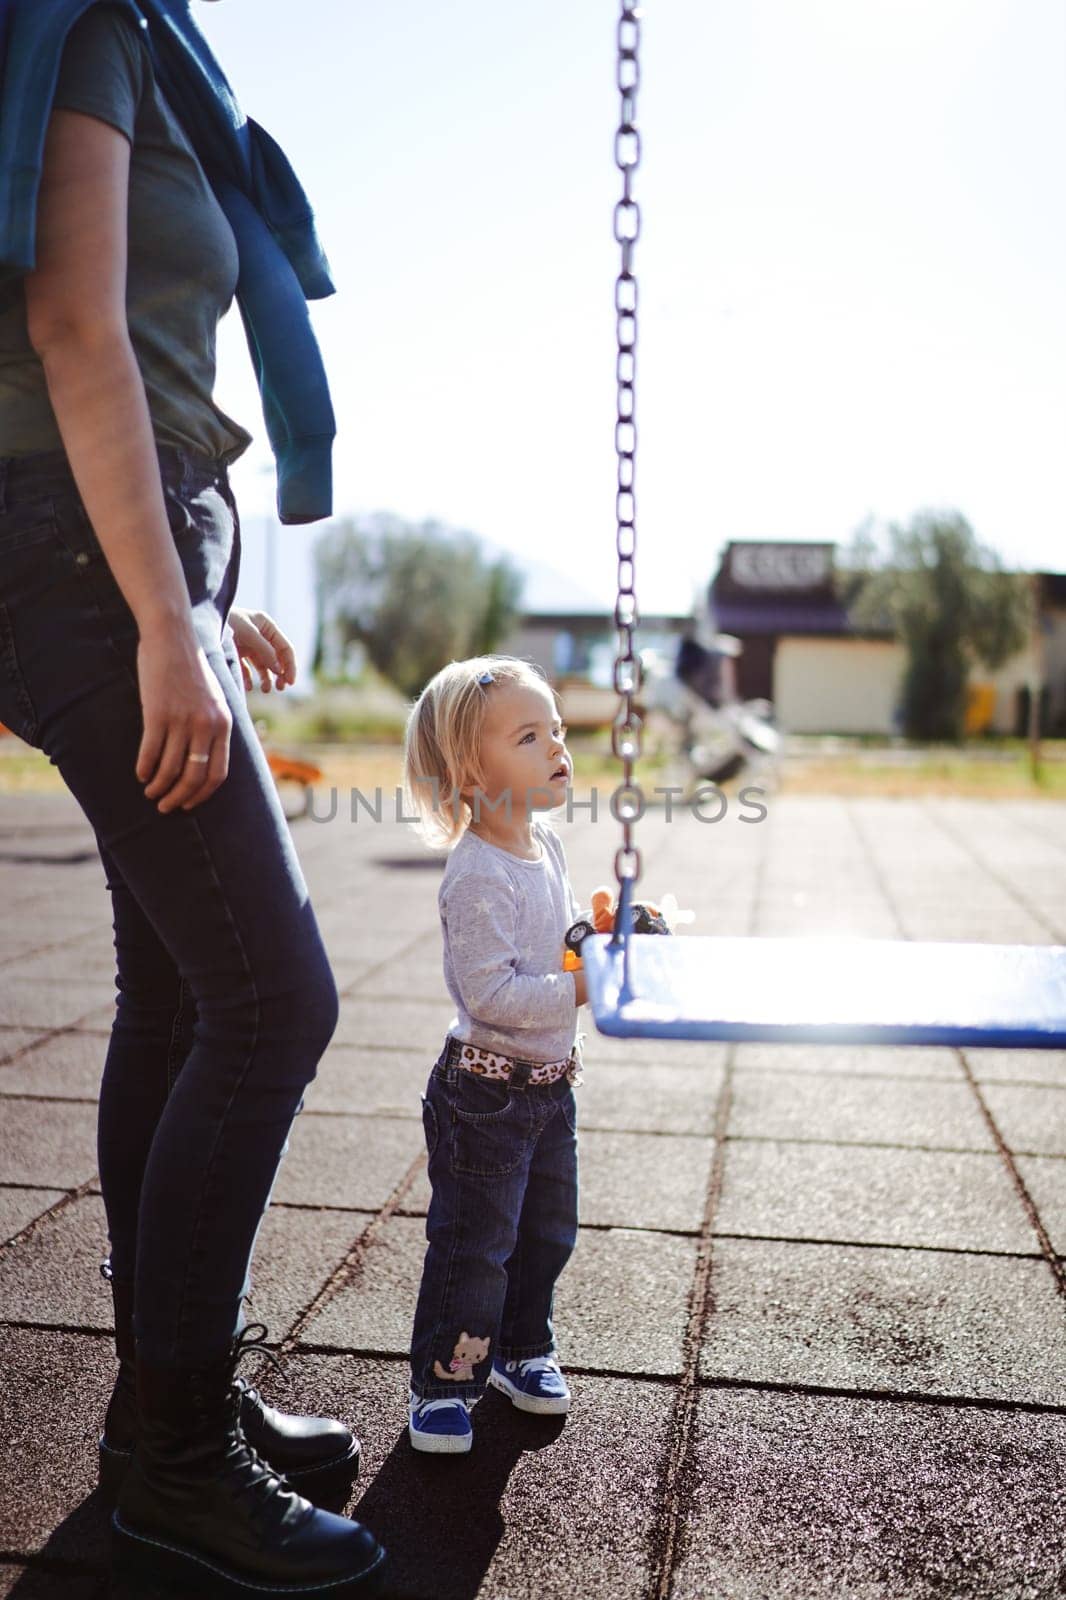 Mom stands near the little girl next to the chain swing on the playground. Cropped by Nadtochiy